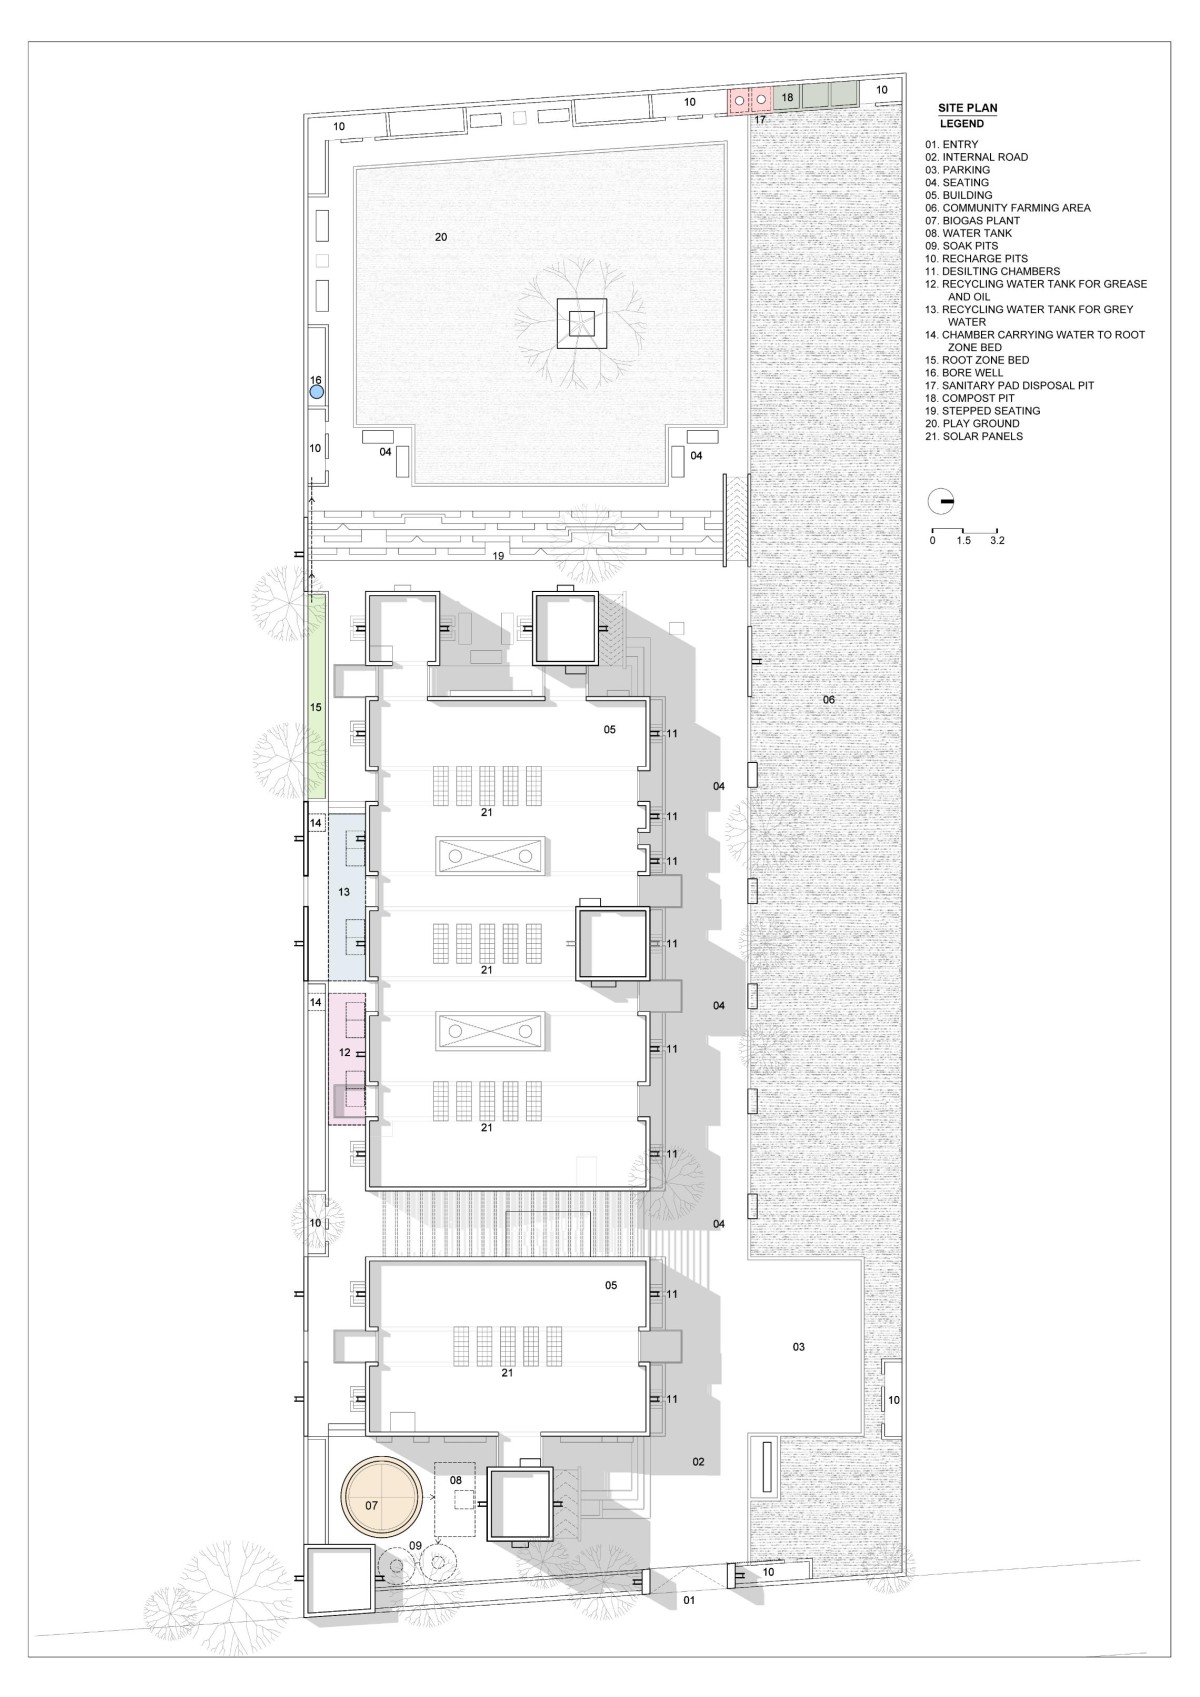 Site Plan of Women Empowerment Shelter by studioPPBA